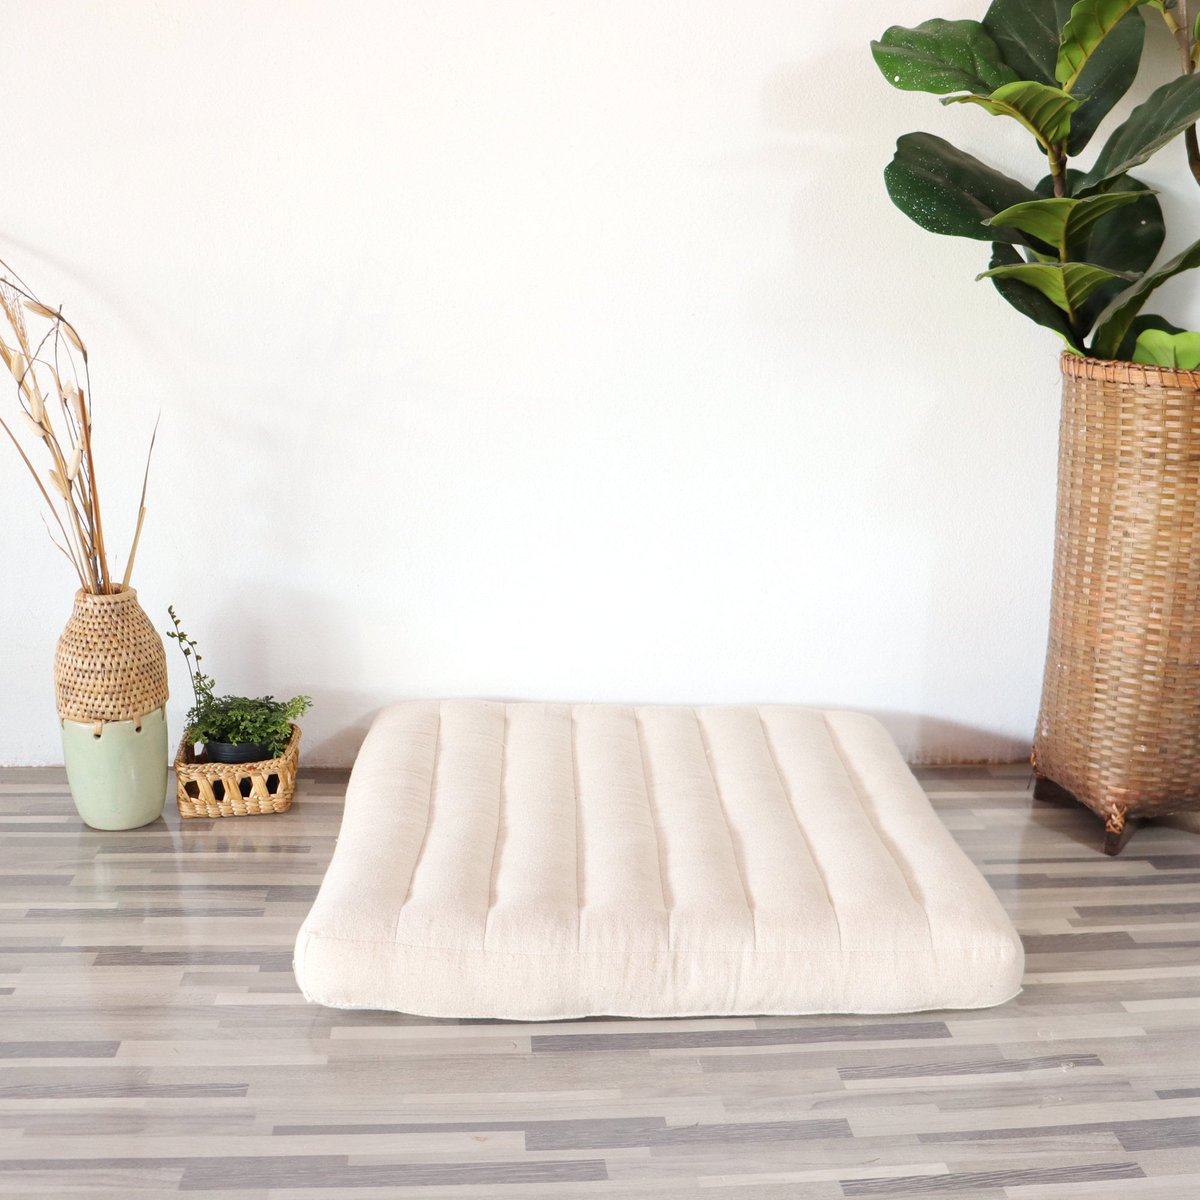 Excited to share the latest addition to my #etsy shop: Comfortable Kapok Filled Meditation Pillow & Floor Cushion for Relaxation And Comfort - Thai Home etsy.me/3E7ZpGz #no #bedroom #minimalist #white #meditationcushion #kapokfilling #floorcushion #meditationpi